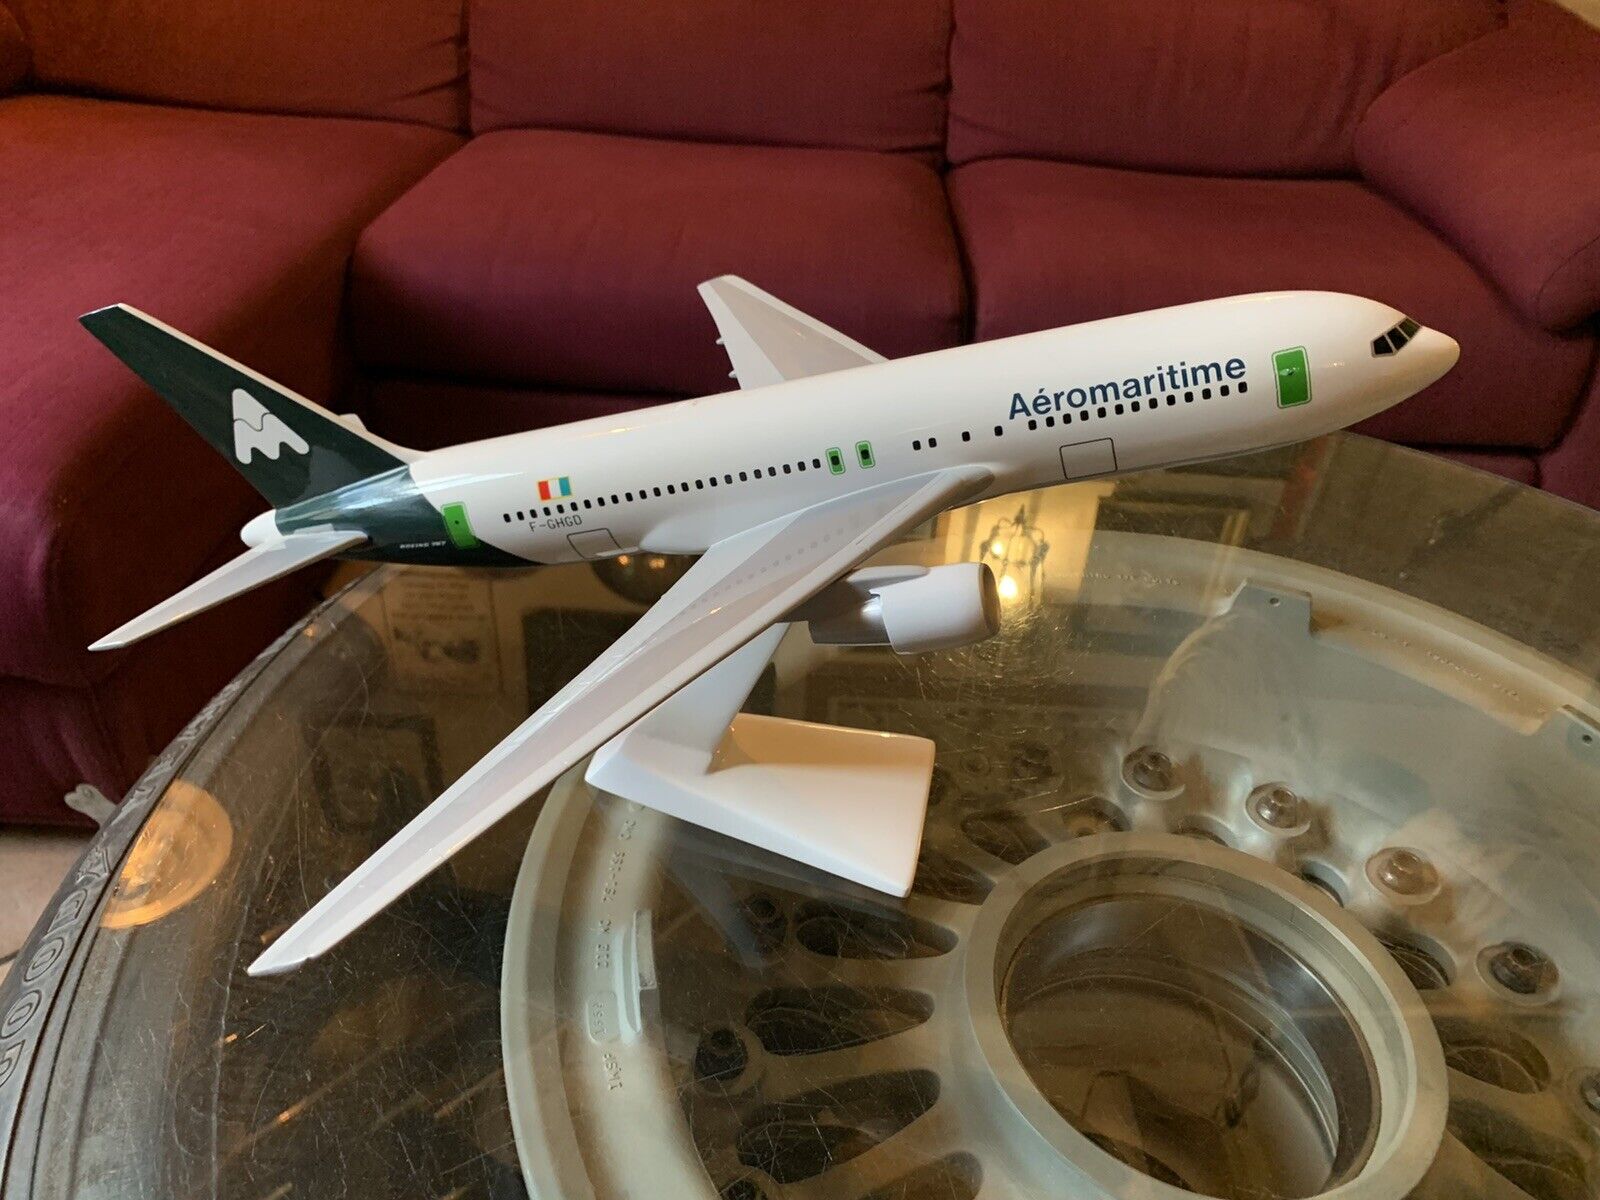 Vintage 1/100 BOEING 767-200 AEROMARITIME Model By ANTOINE Made In France Pacmin